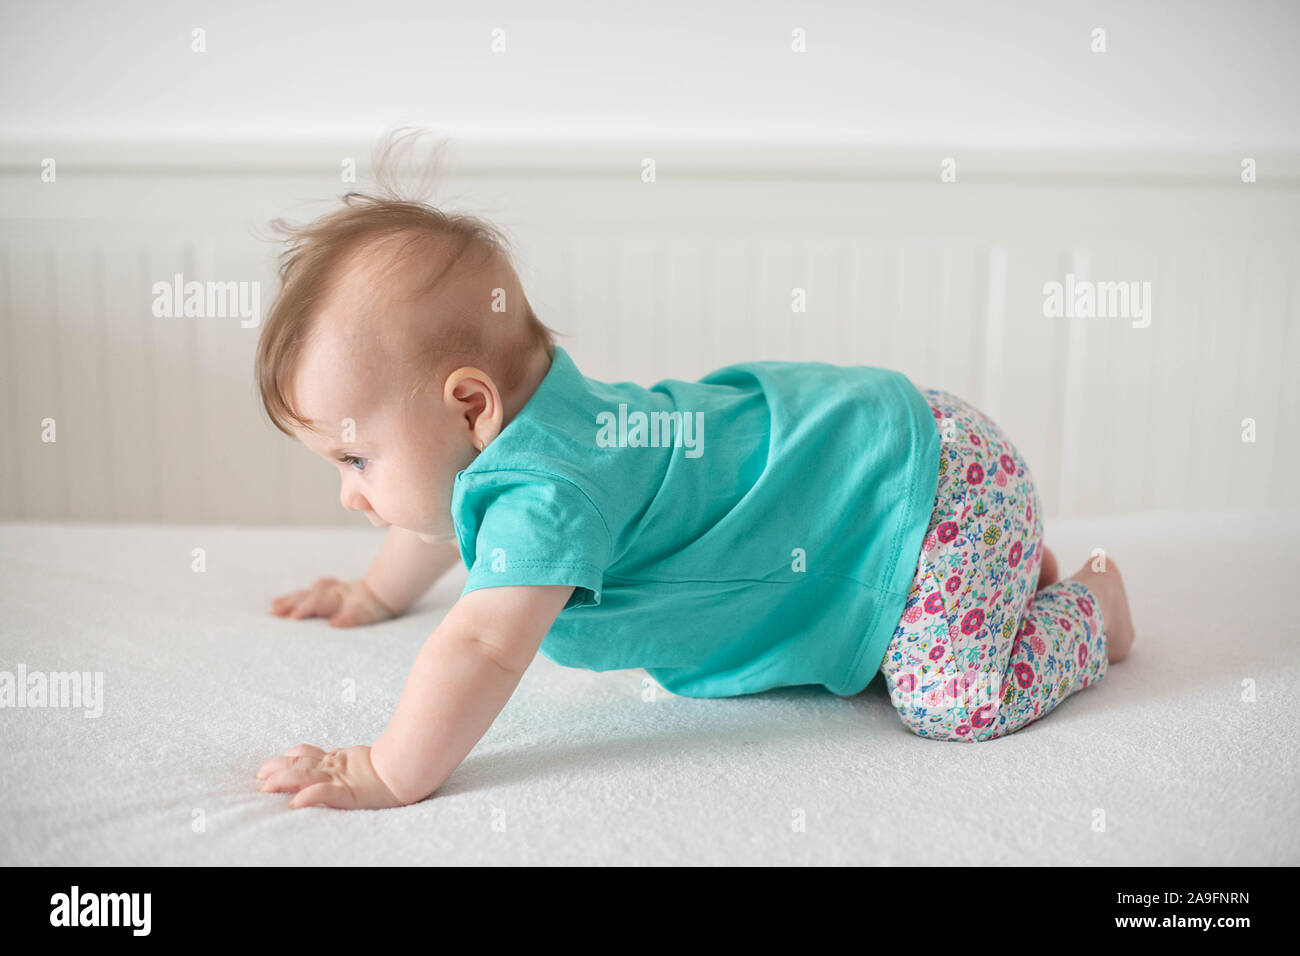 Adorable Caucasian baby girl with blue eyes trying to stand up and walk, focused on the effort and progress baby facial expressions and family concept Stock Photo